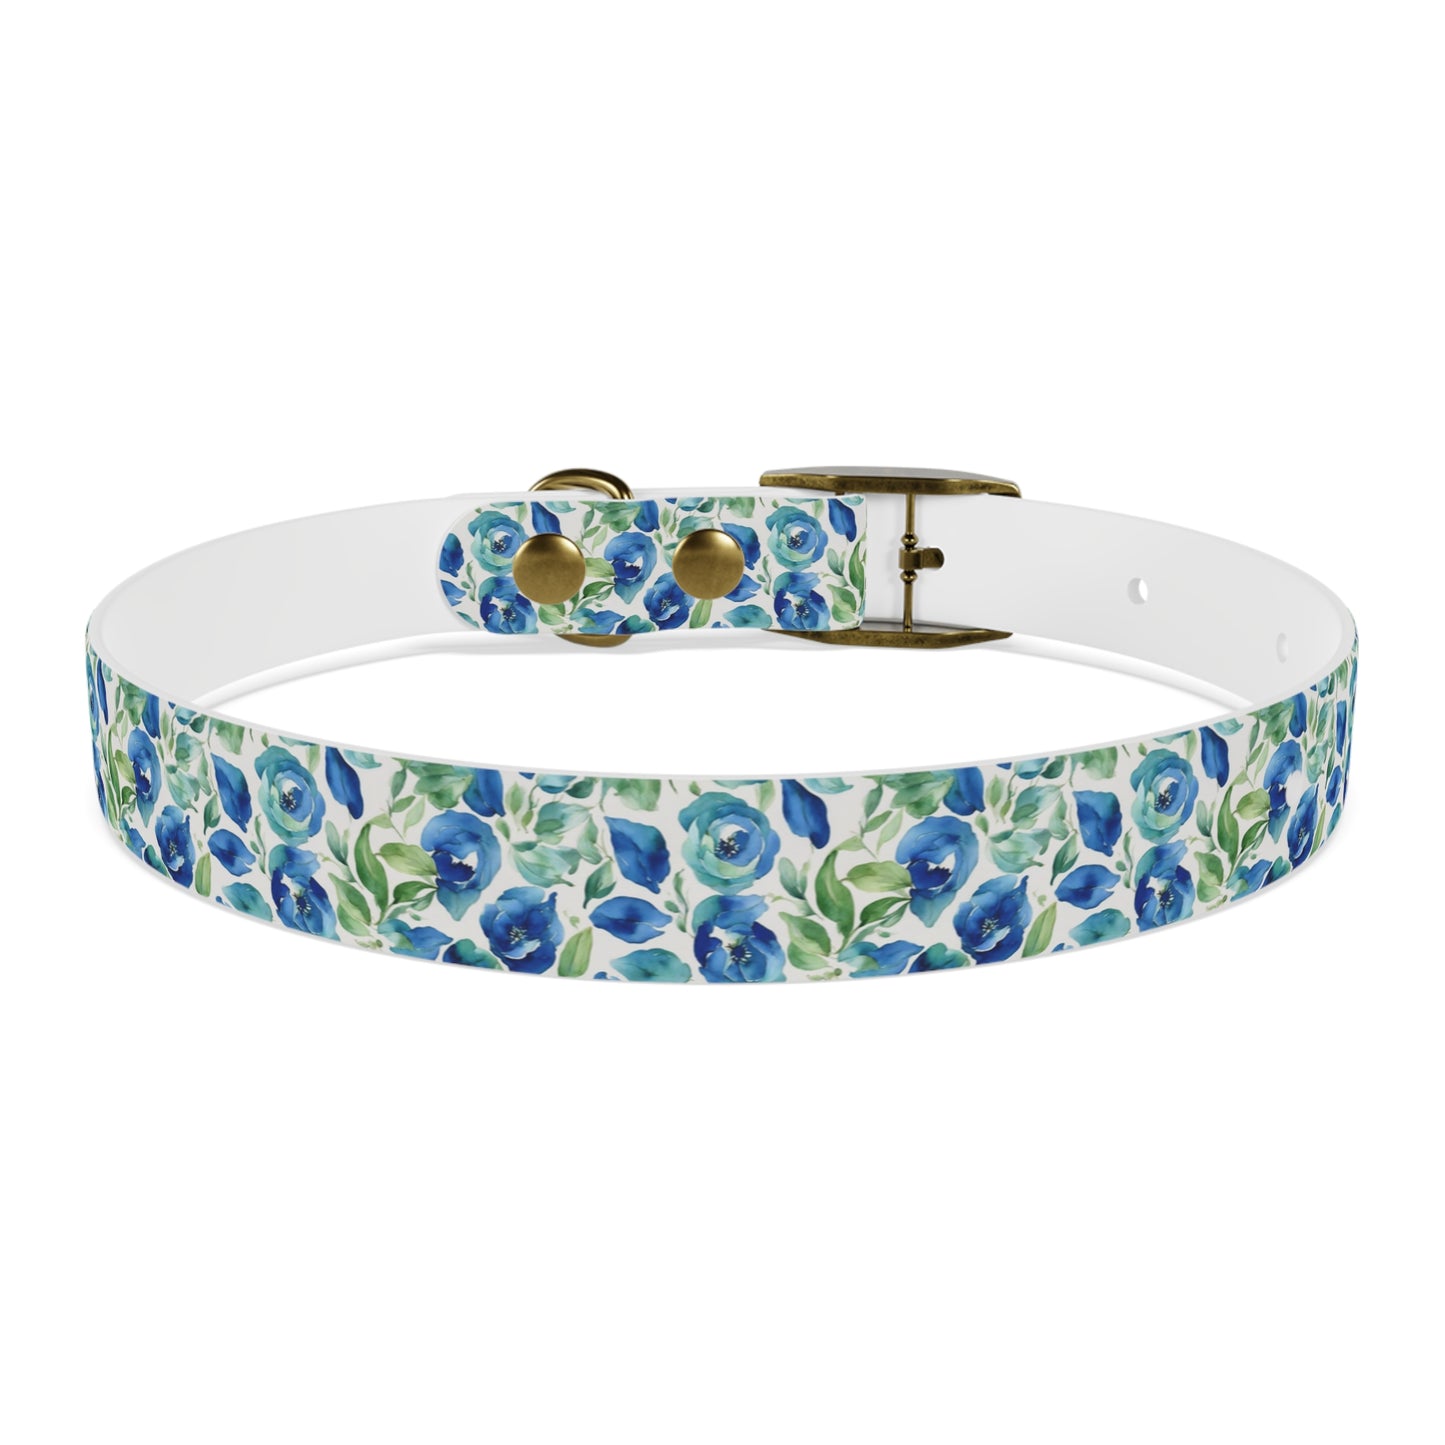 Blue & Green Floral Watercolor Pattern Dog Collar